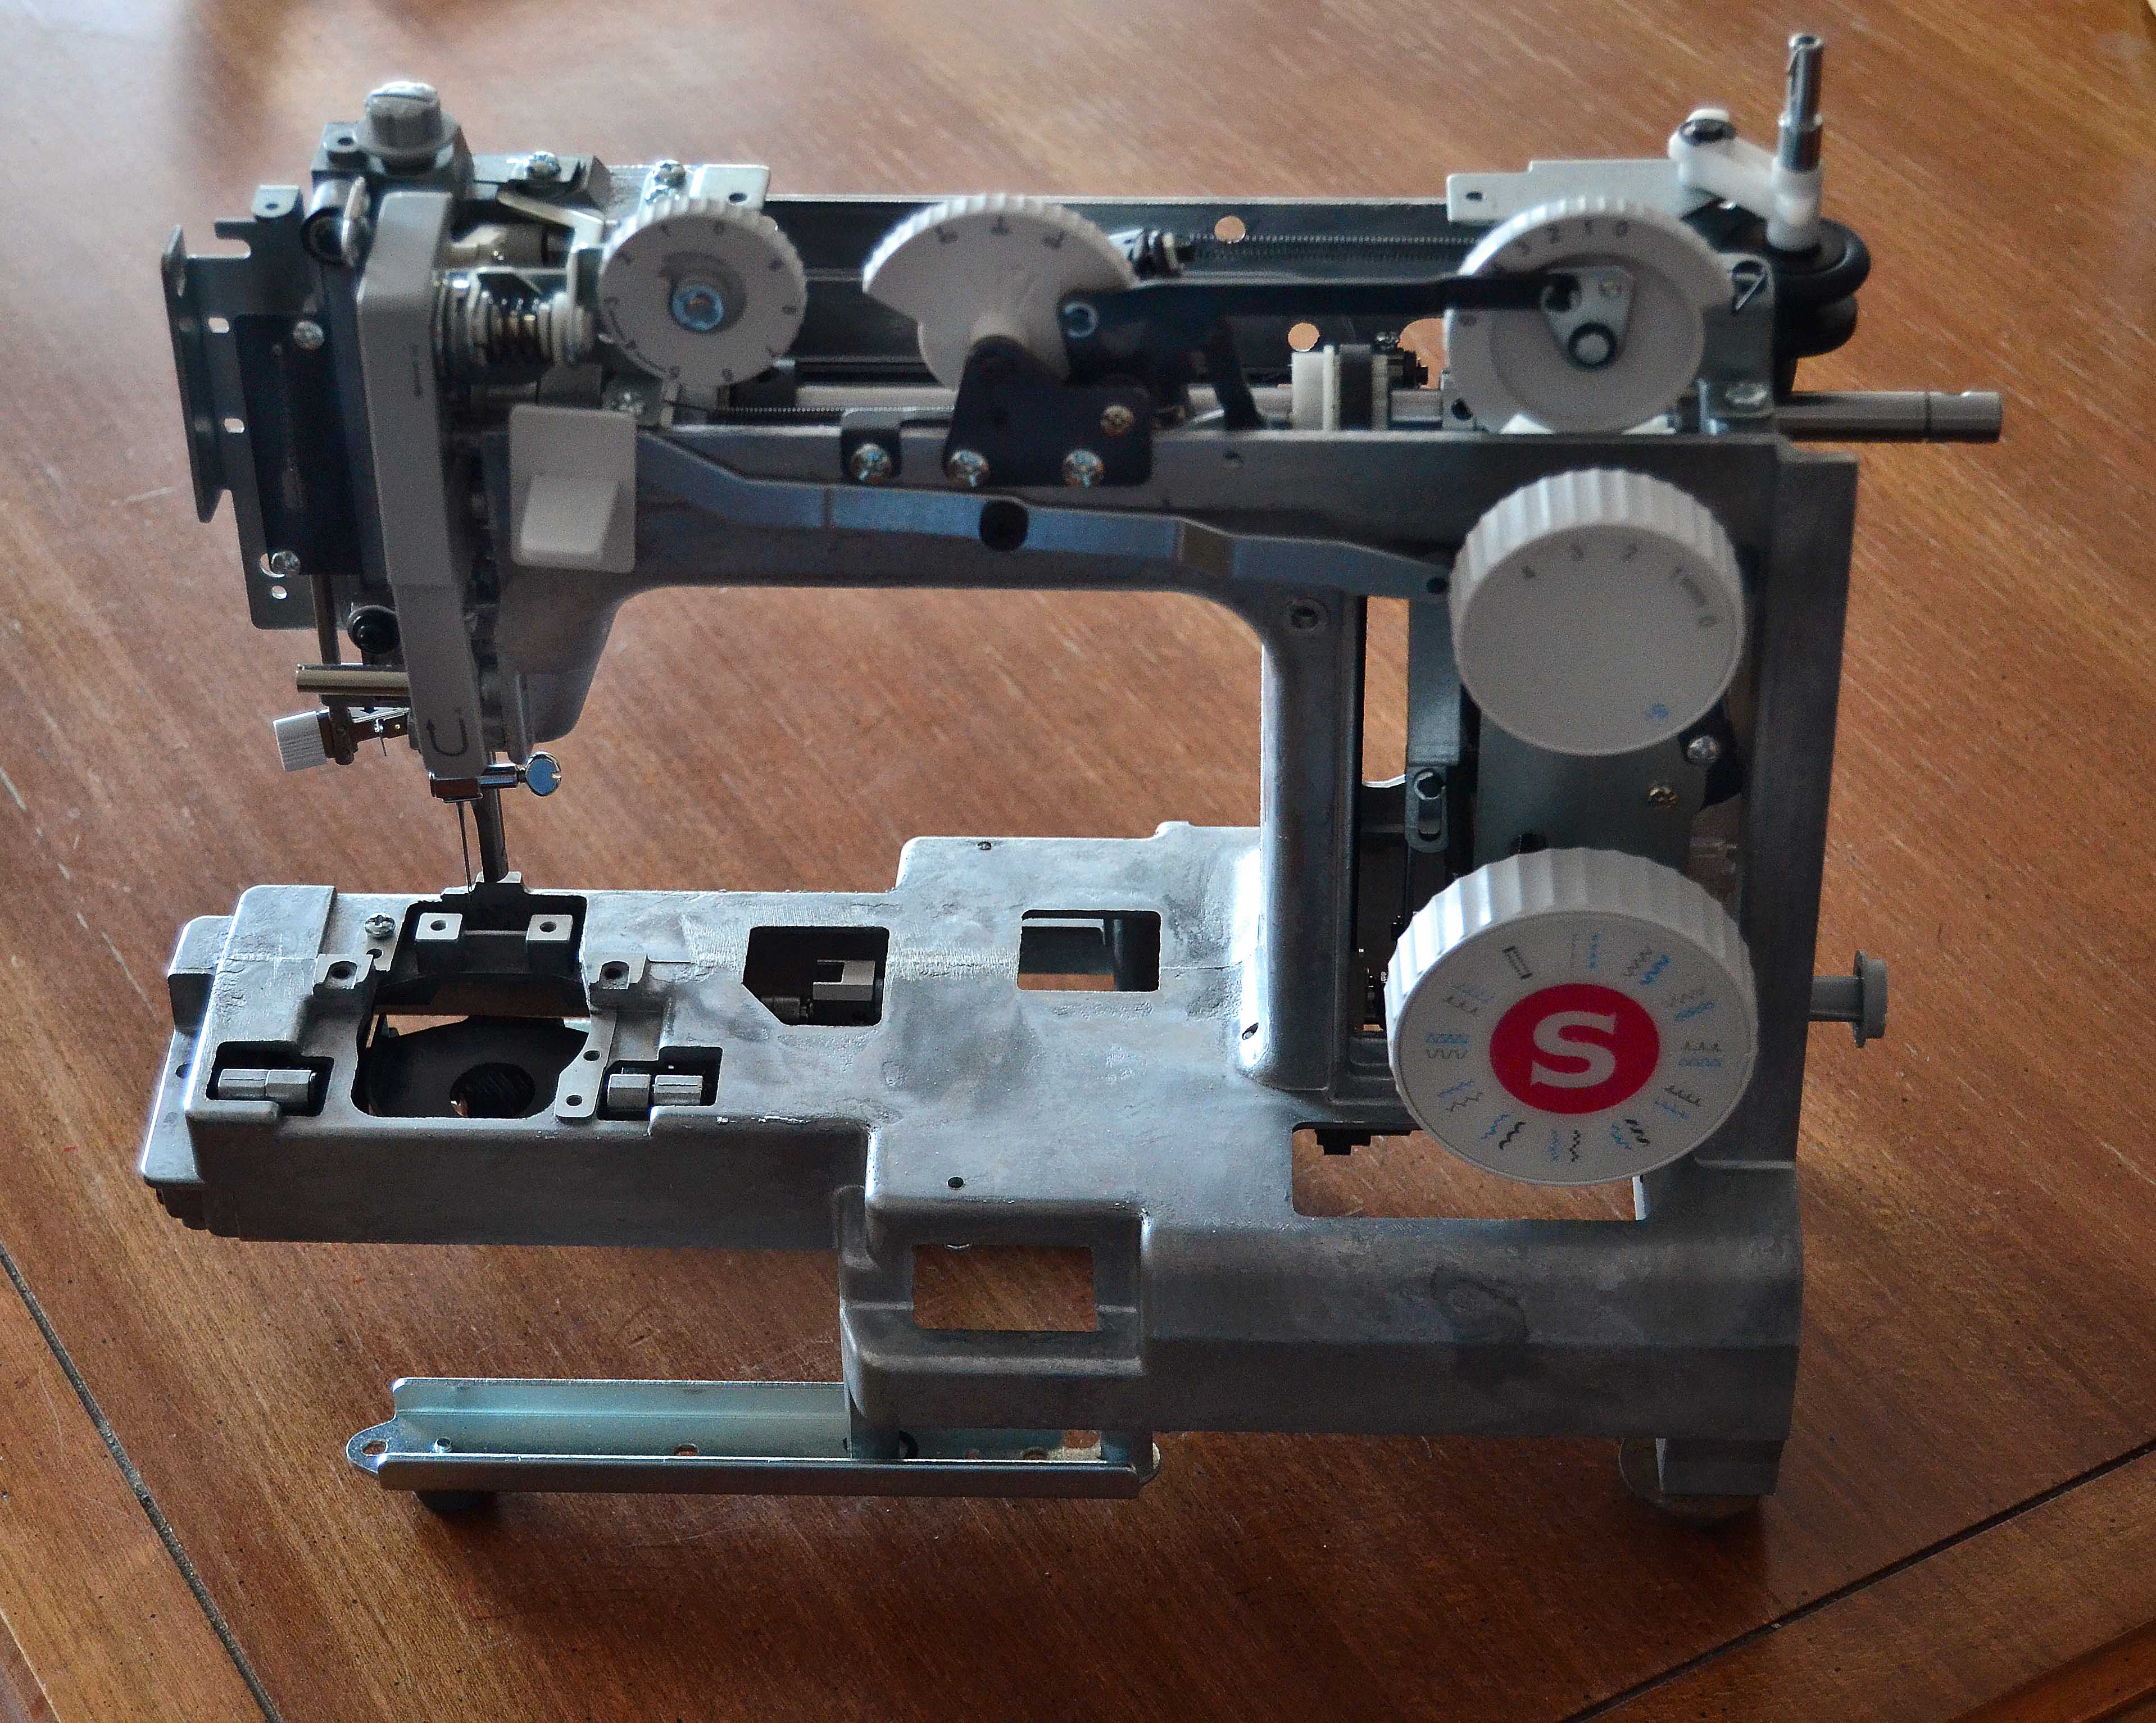 A sewing machine that's been stripped down to it's metal frame